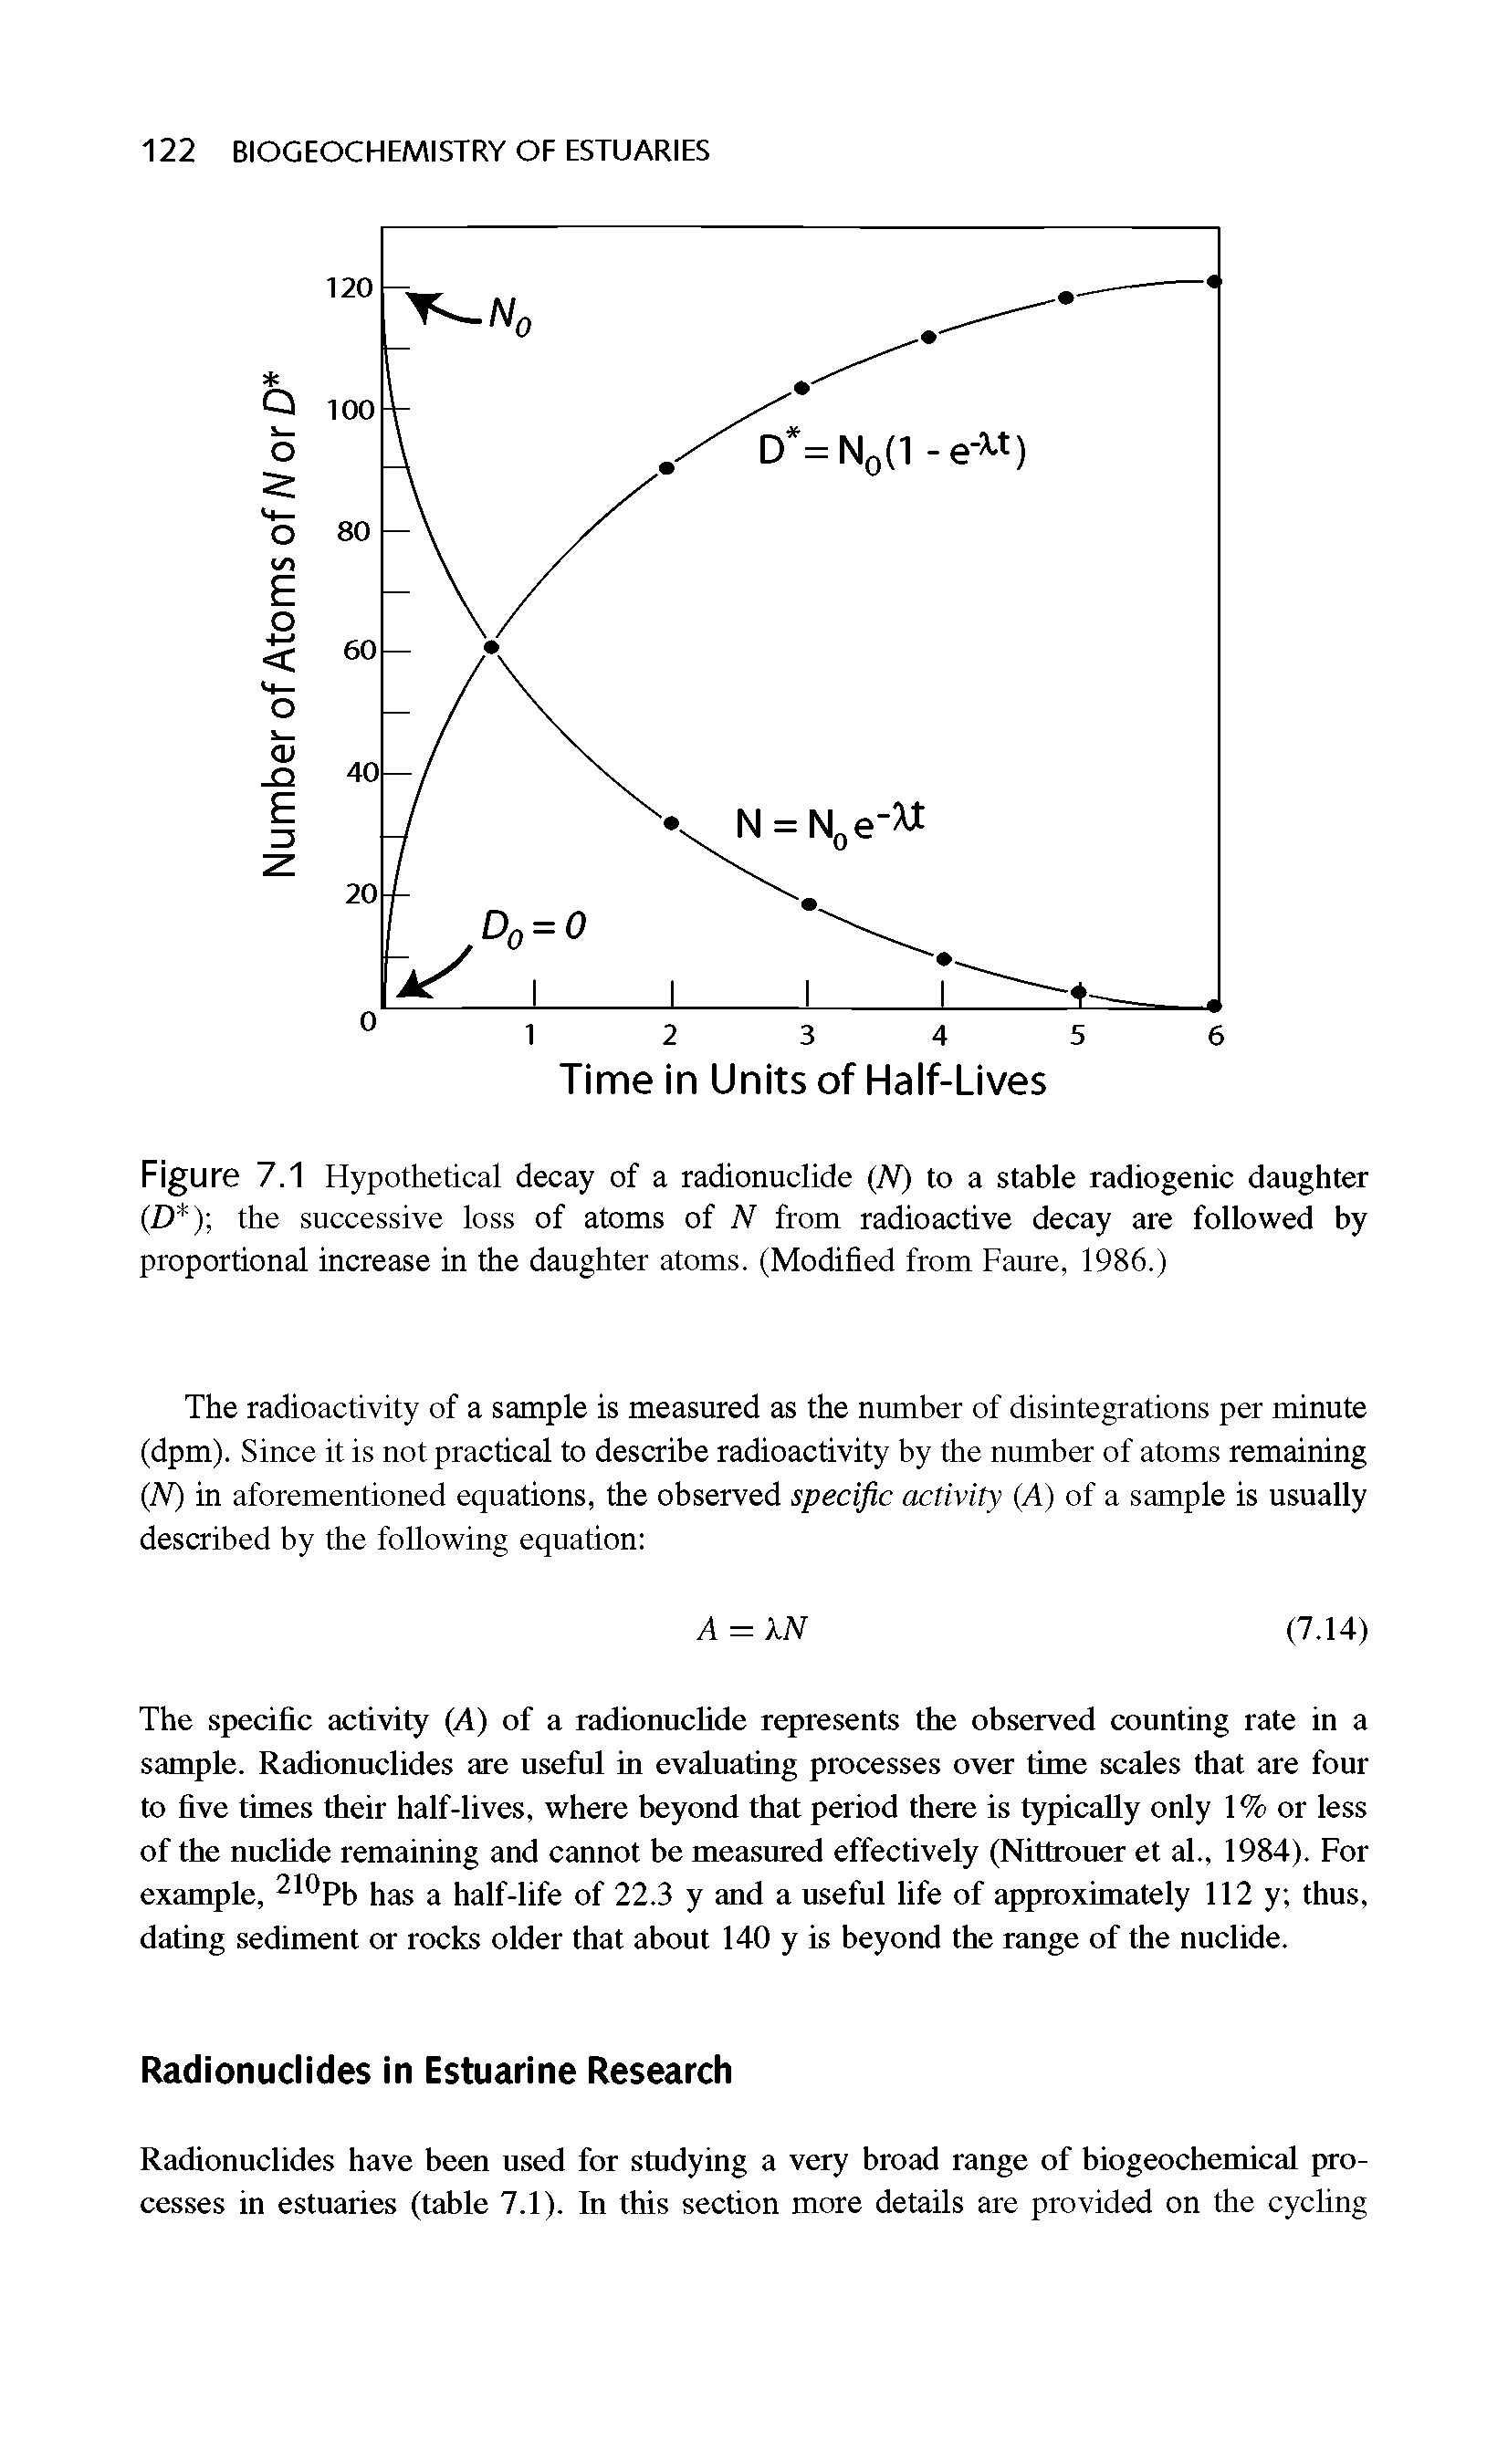 Figure 7.1 Hypothetical decay of a radionuclide (N) to a stable radiogenic daughter (D y, the successive loss of atoms of N from radioactive decay are followed by proportional increase in the daughter atoms. (Modified from Faure, 1986.)...